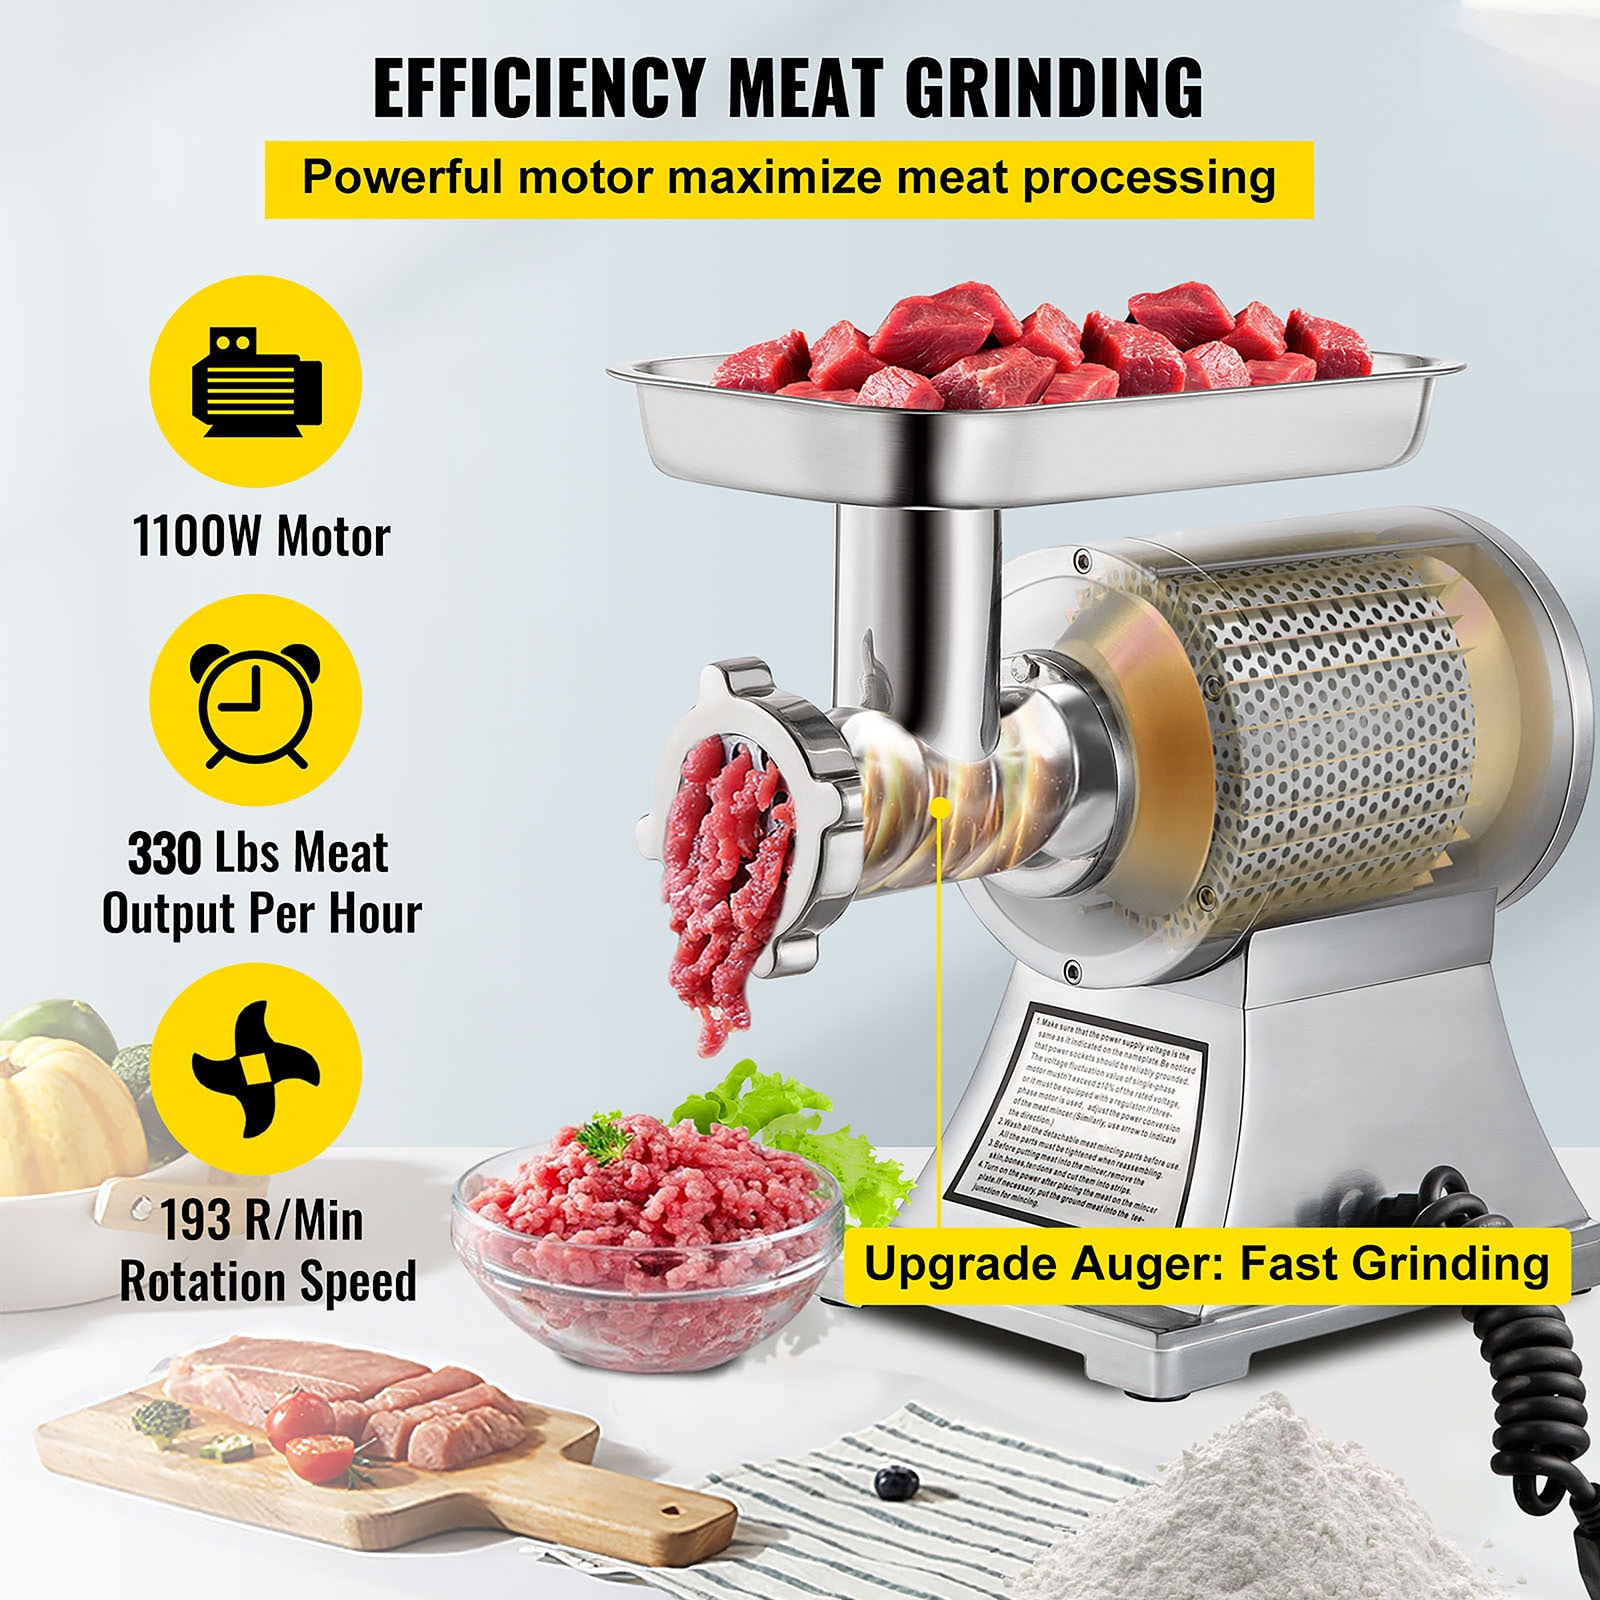 Picking the right meat grinder makes processing more rewarding